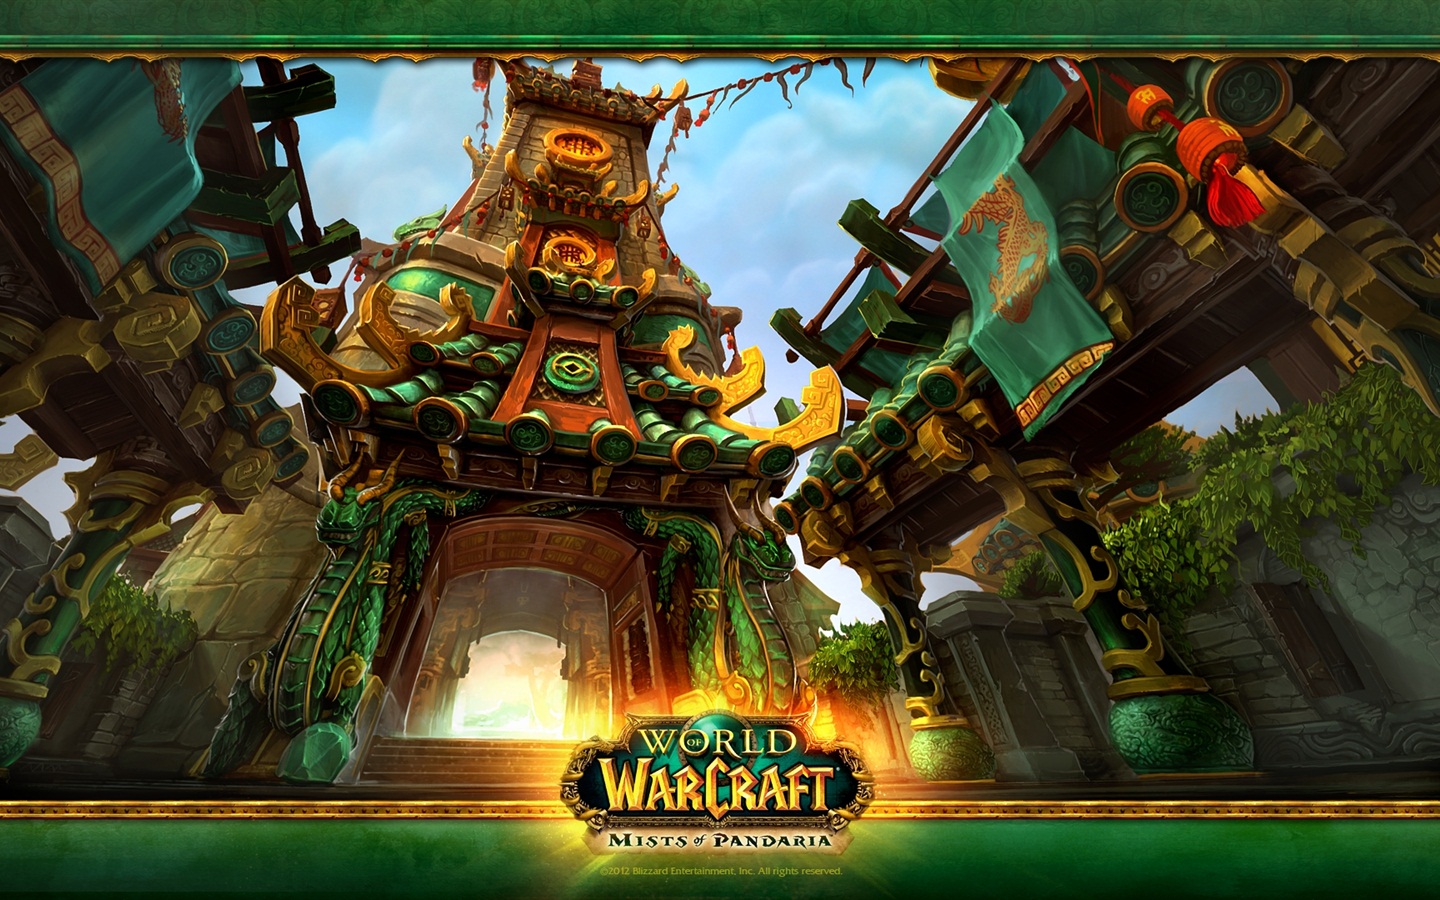 World of Warcraft: Mists of Pandaria HD wallpapers #6 - 1440x900